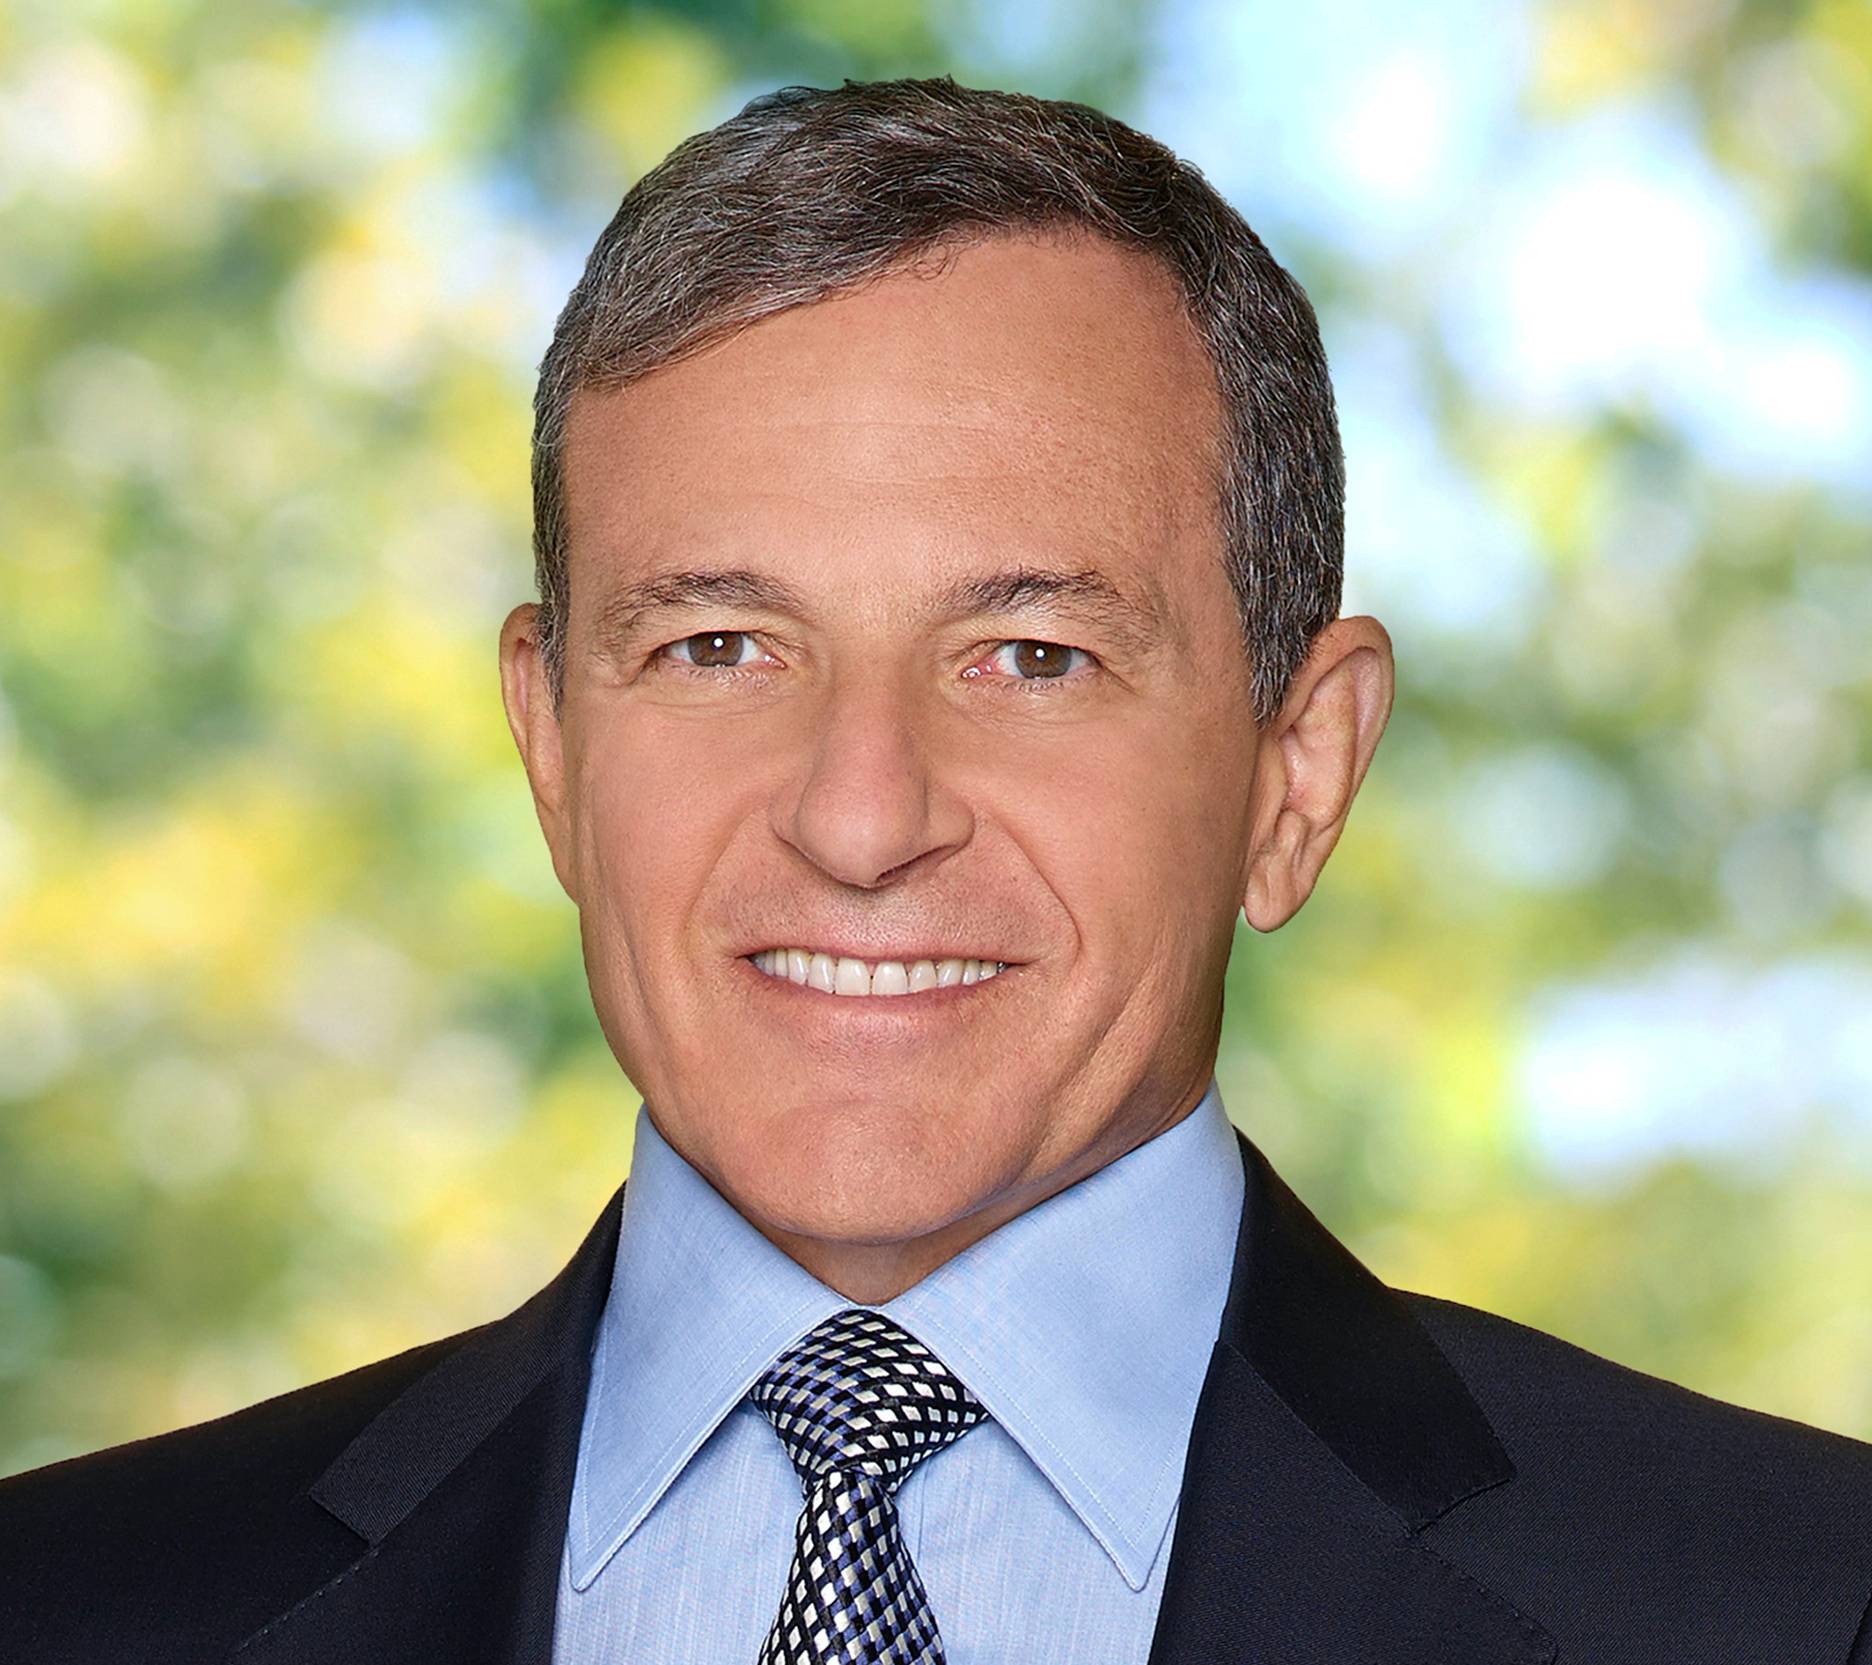 Despite hand-picking Bob Chapek as his successor as Disney CEO, Iger was reportedly less than impressed with Chapek's role as CEO